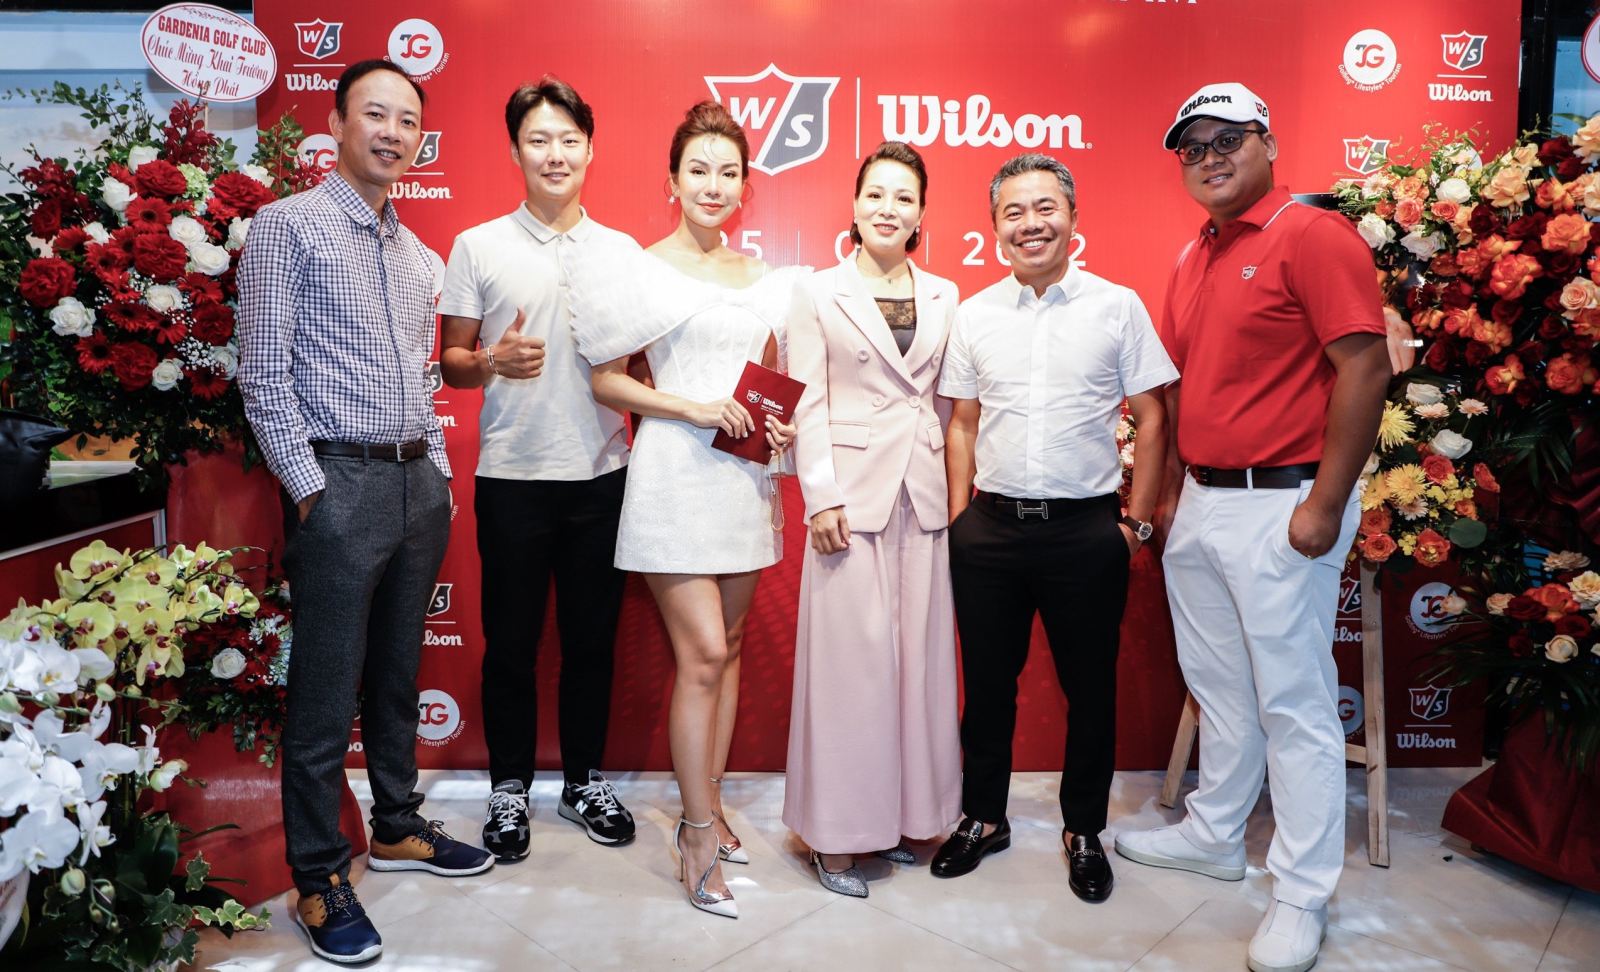 VTV8 Sports: Wilson Golf brings 100 years of heritage to APGS - Asia Pacific Summit